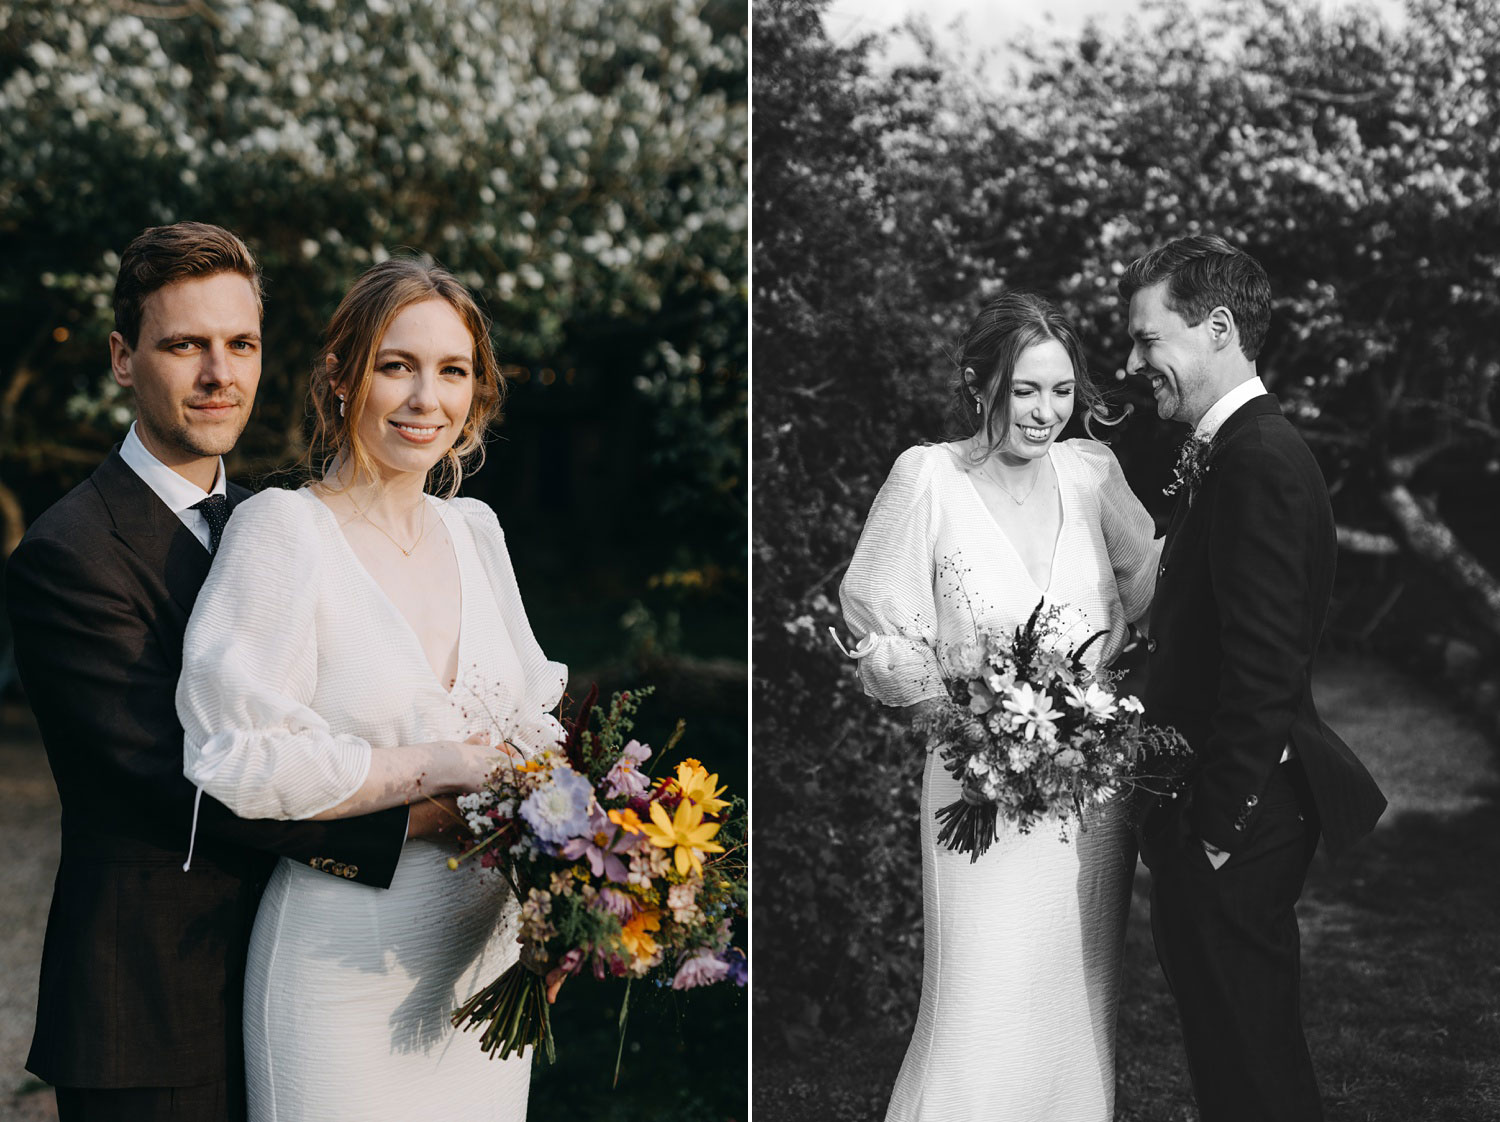 Intimate moment: the couple's portrait session showcasing their love and joy at Helenekilde Badehotel